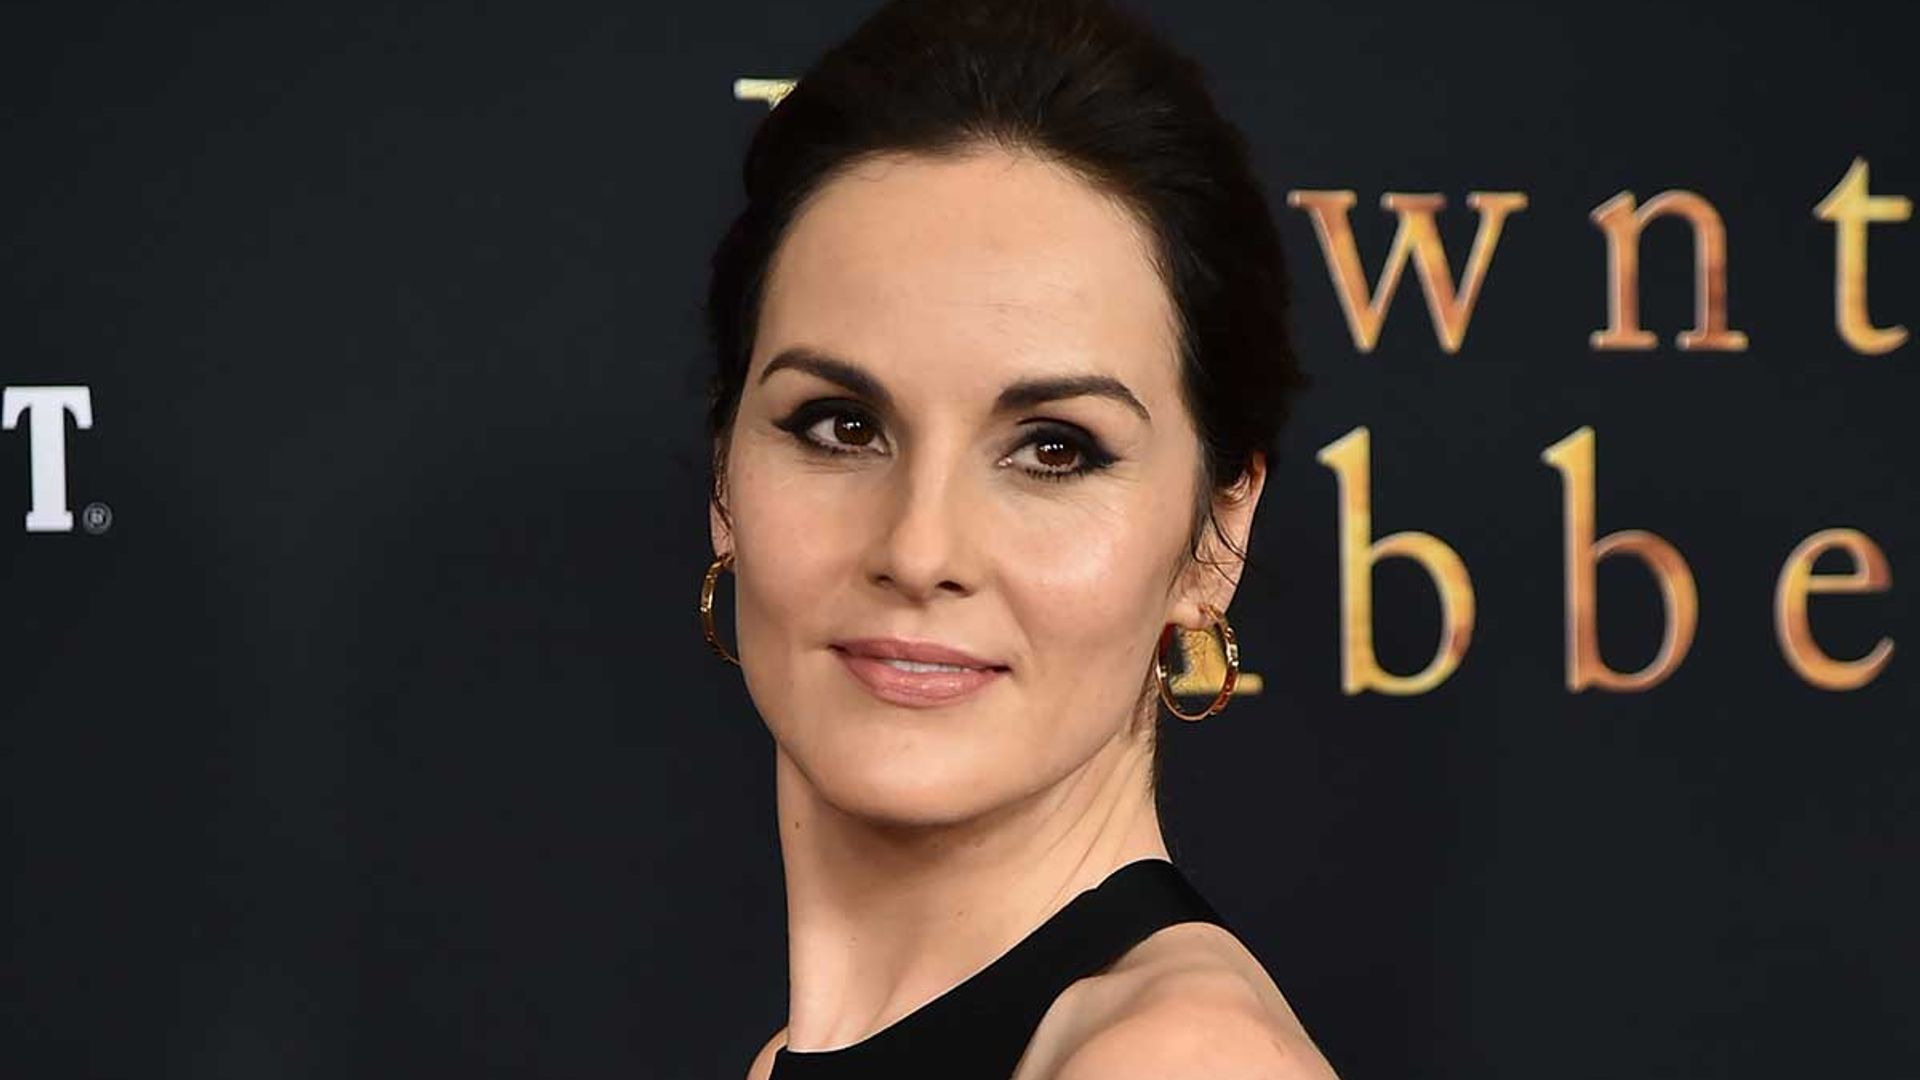 Downton Abbey star Michelle Dockery lands exciting new role - details